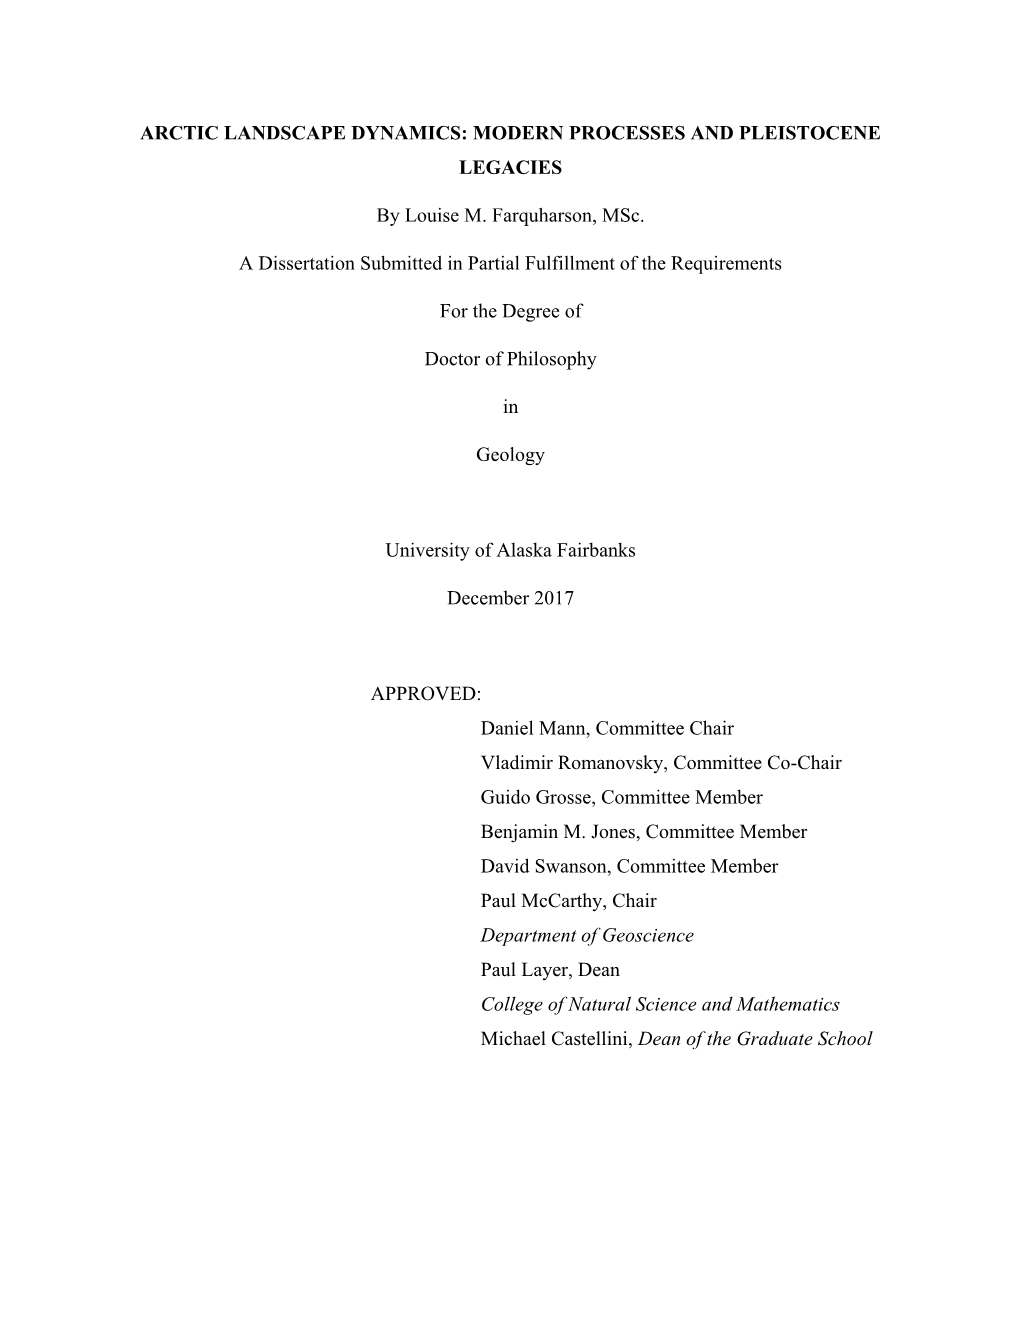 MODERN PROCESSES and PLEISTOCENE LEGACIES by Louise M. Farquharson, Msc. a Dissertation Submitted In